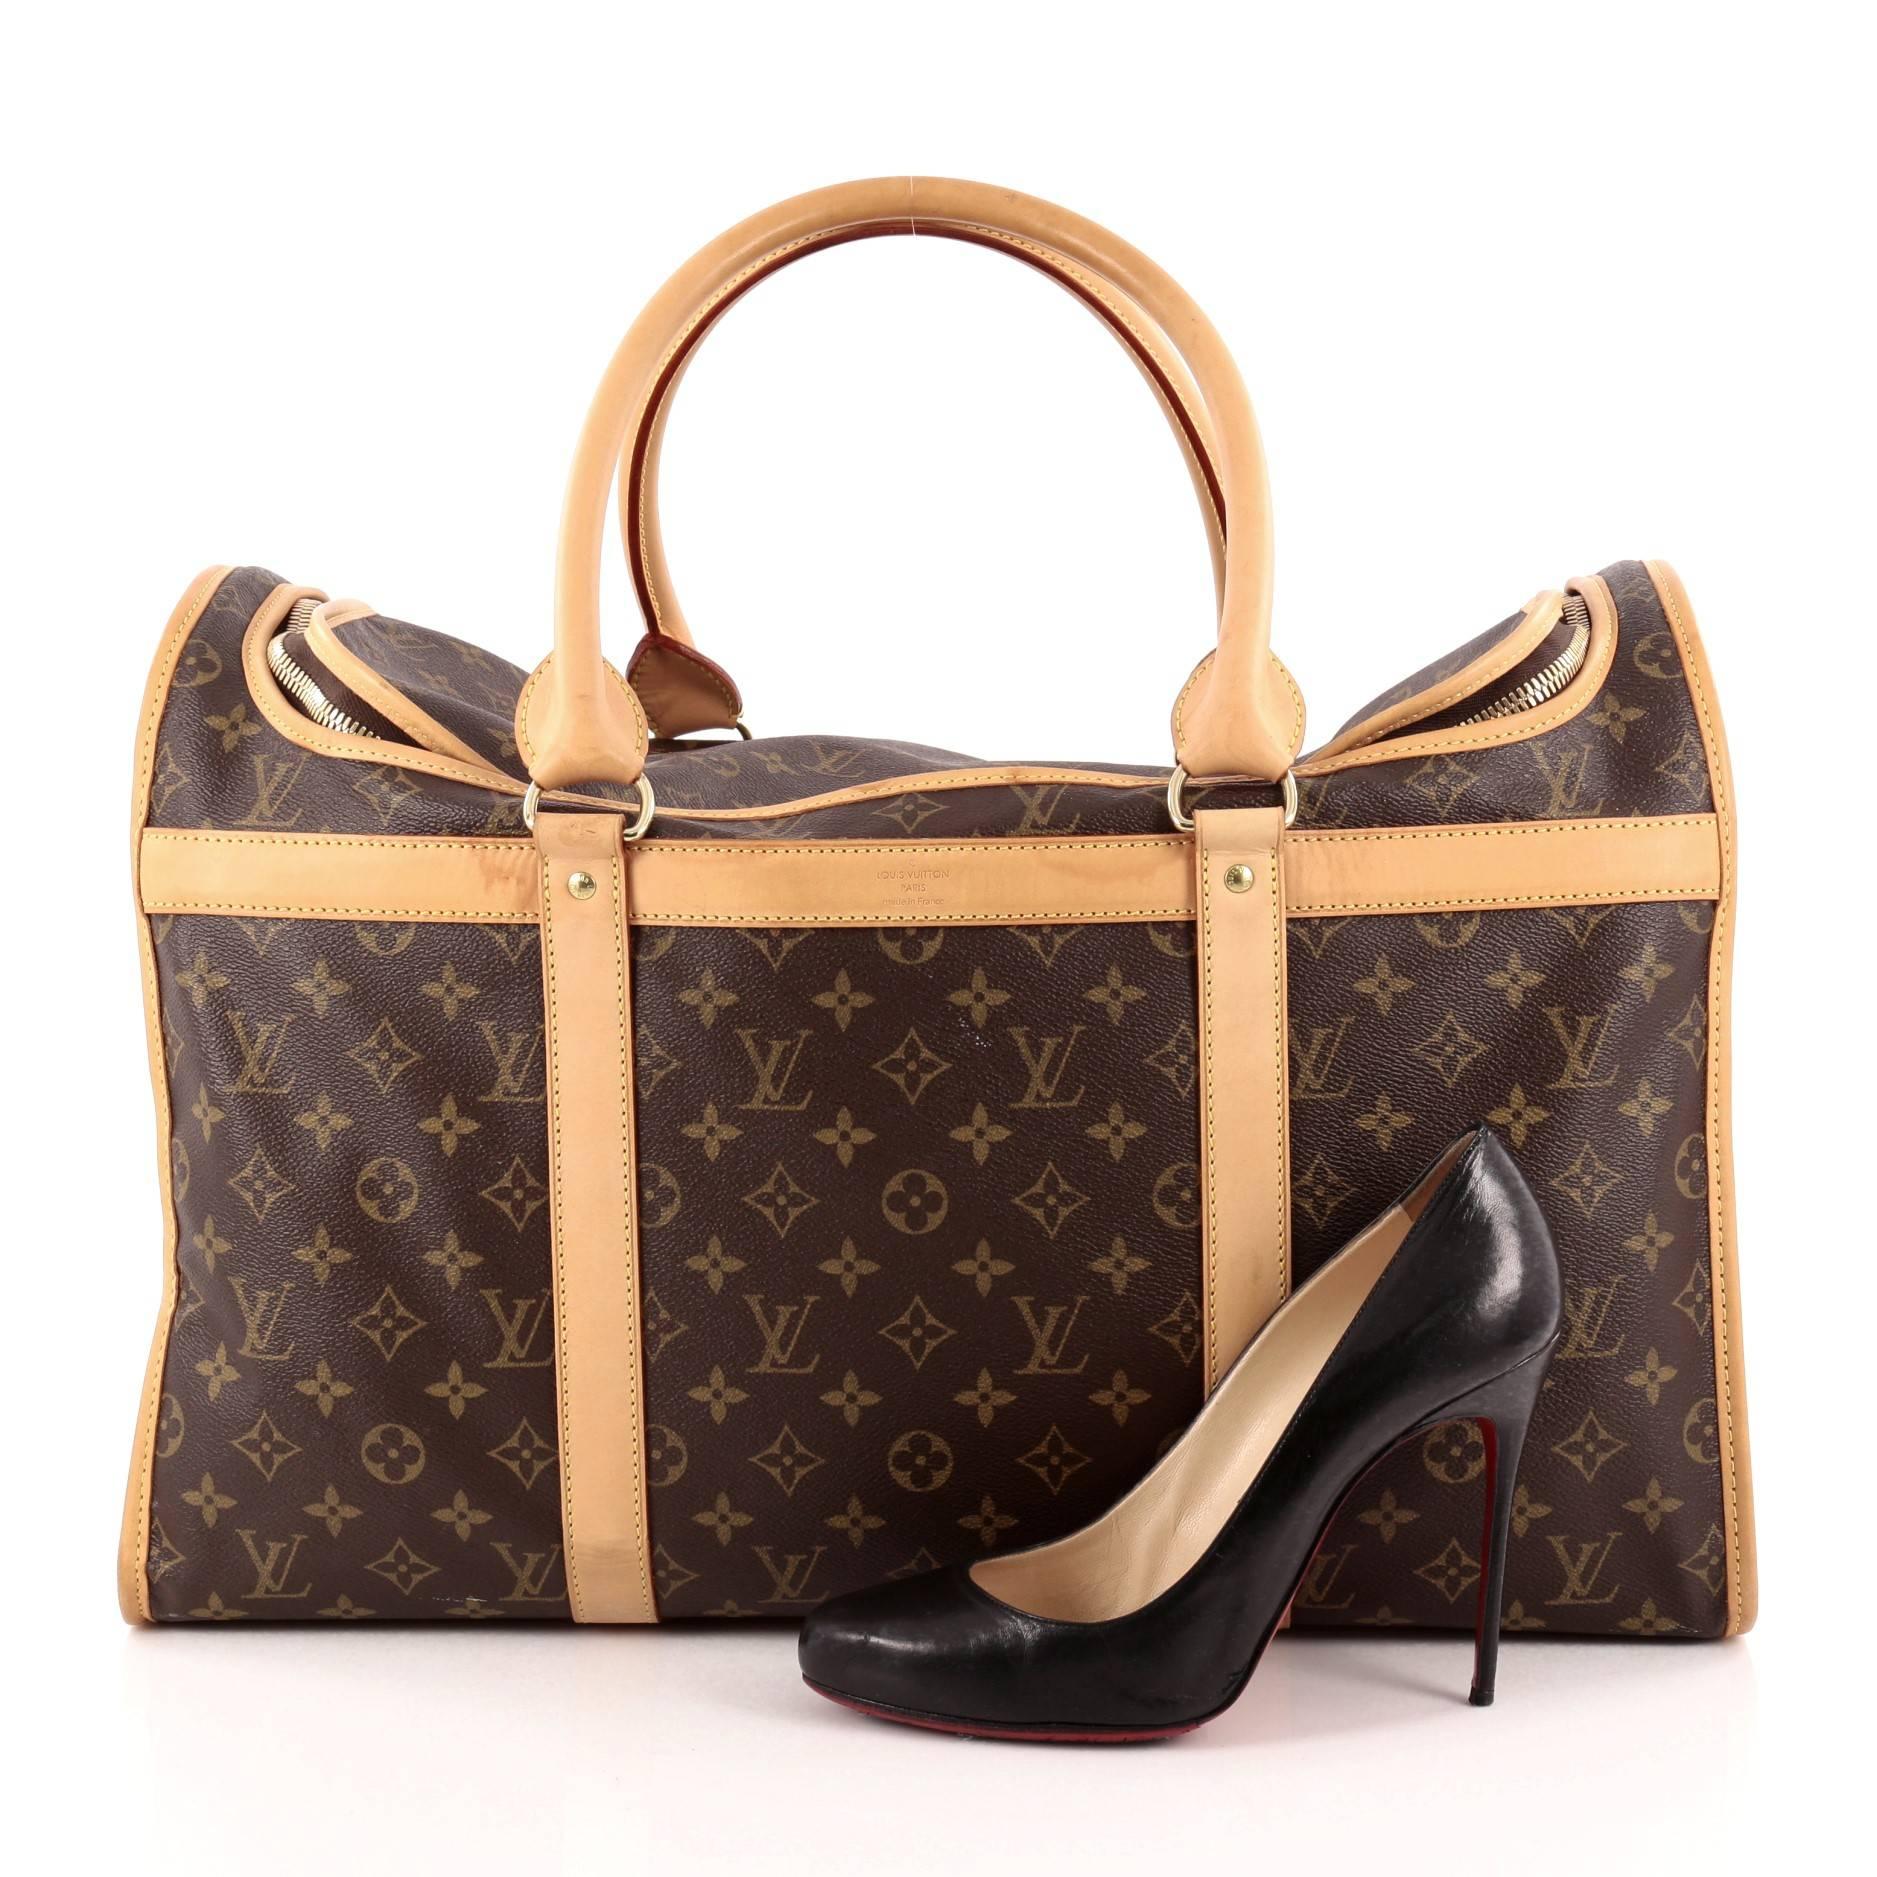 This authentic Louis Vuitton Dog Carrier Monogram Canvas 50 is the perfect stylish travel companion for your little one. Constructed in Louis Vuitton's iconic monogram coated canvas, this spacious dog carrier is equipped with gold-tone breathable